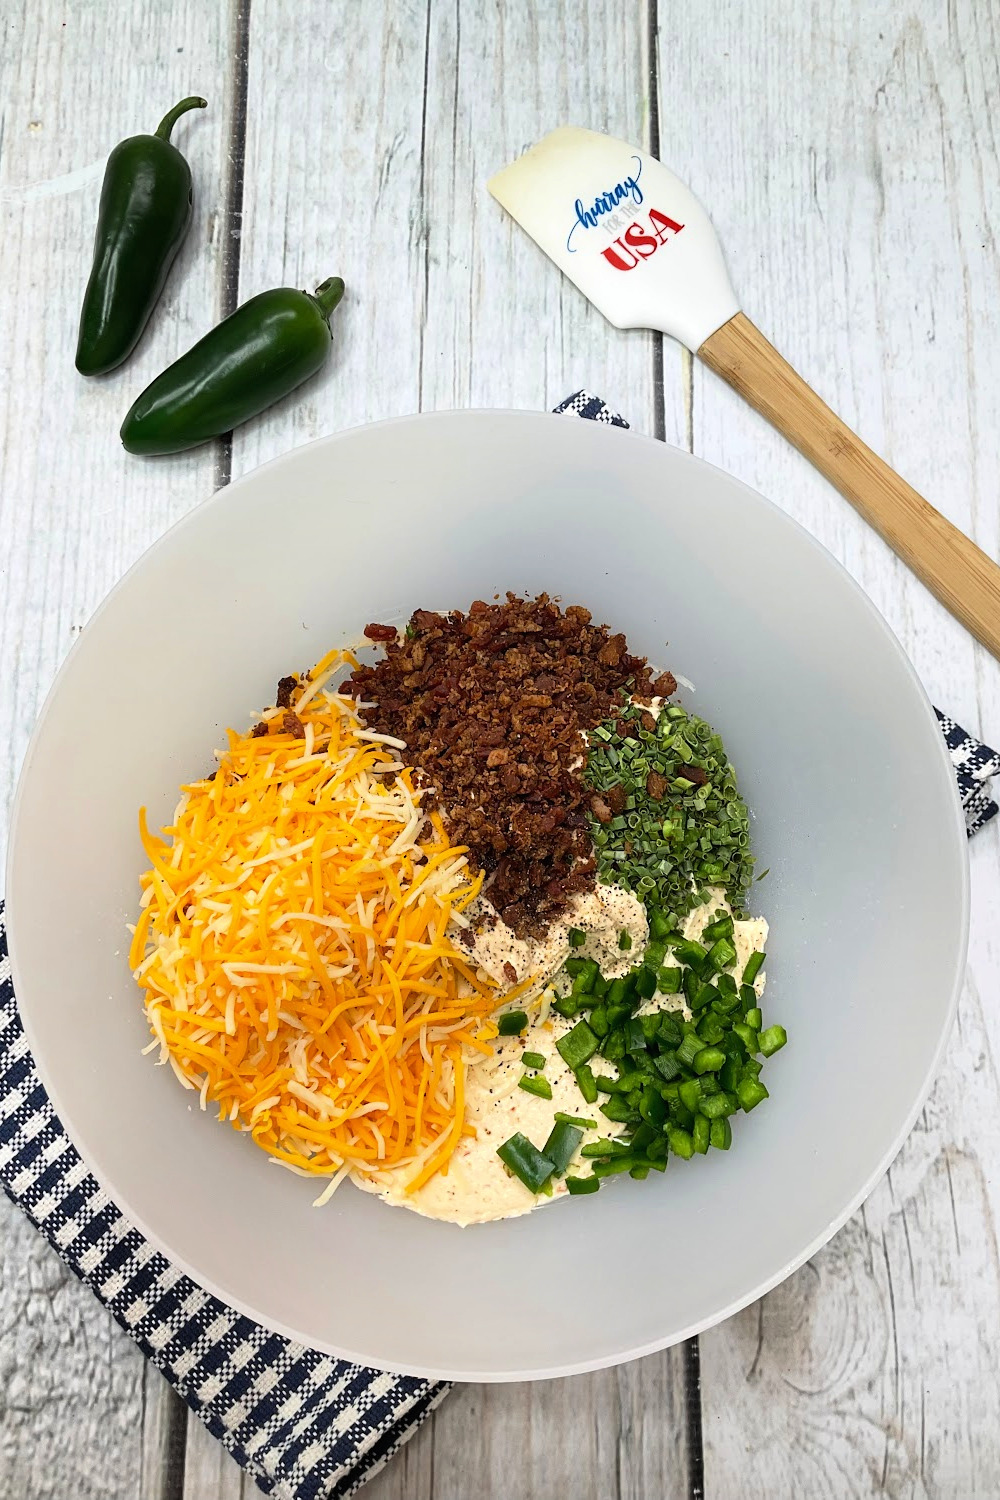 Add all the ingredients to the football cheese ball into a mixing bowl and combine.